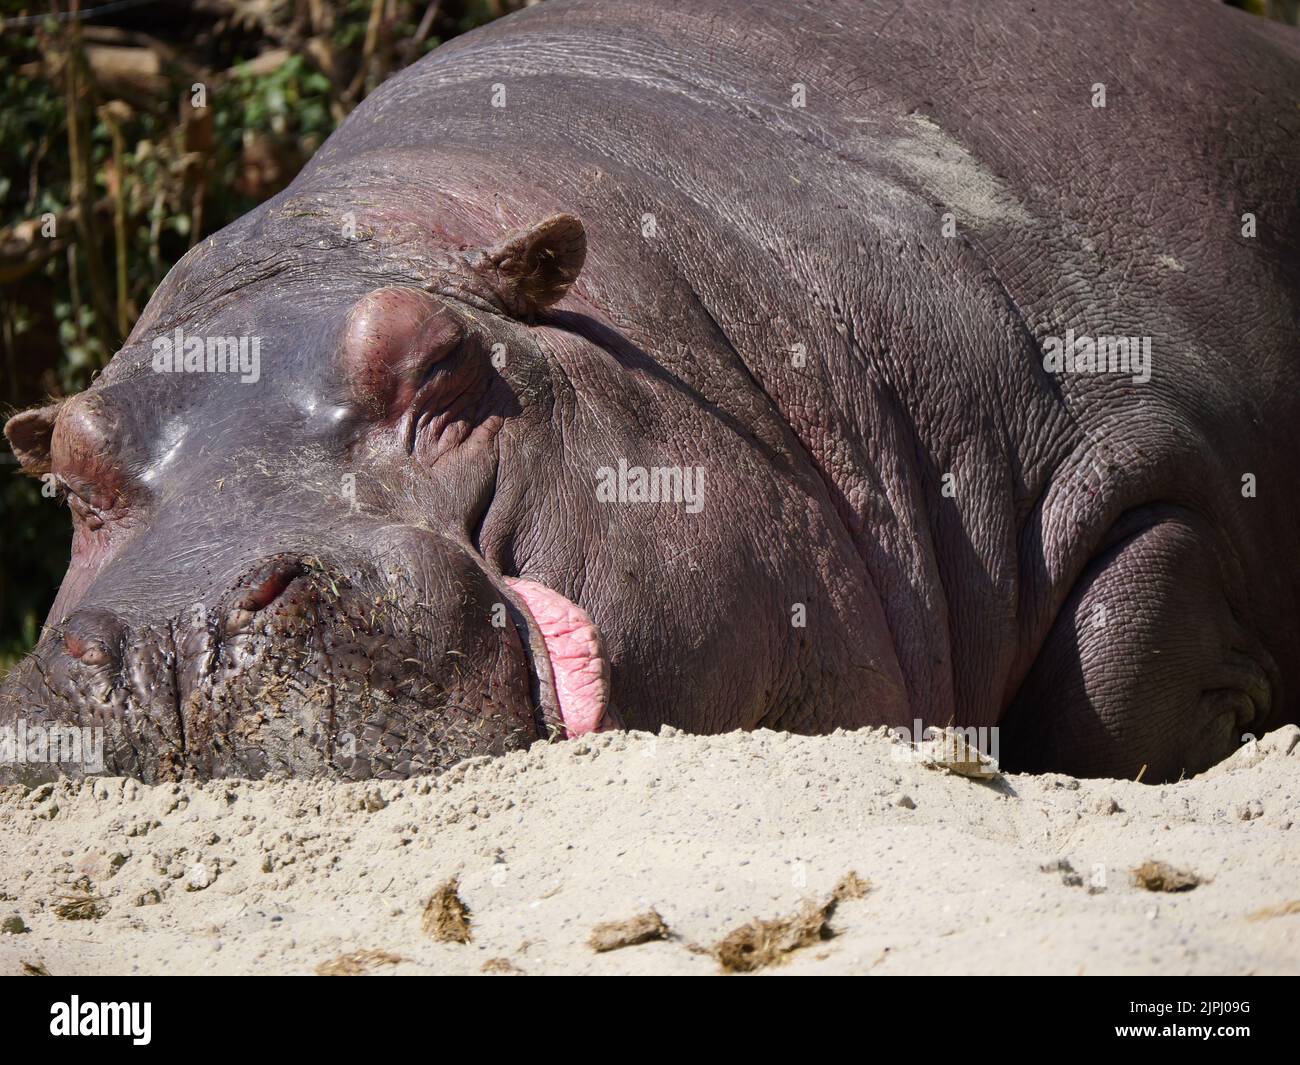 A closeup shot of a large hippopotamus sleeping on the sandy ground on a sunny day Stock Photo